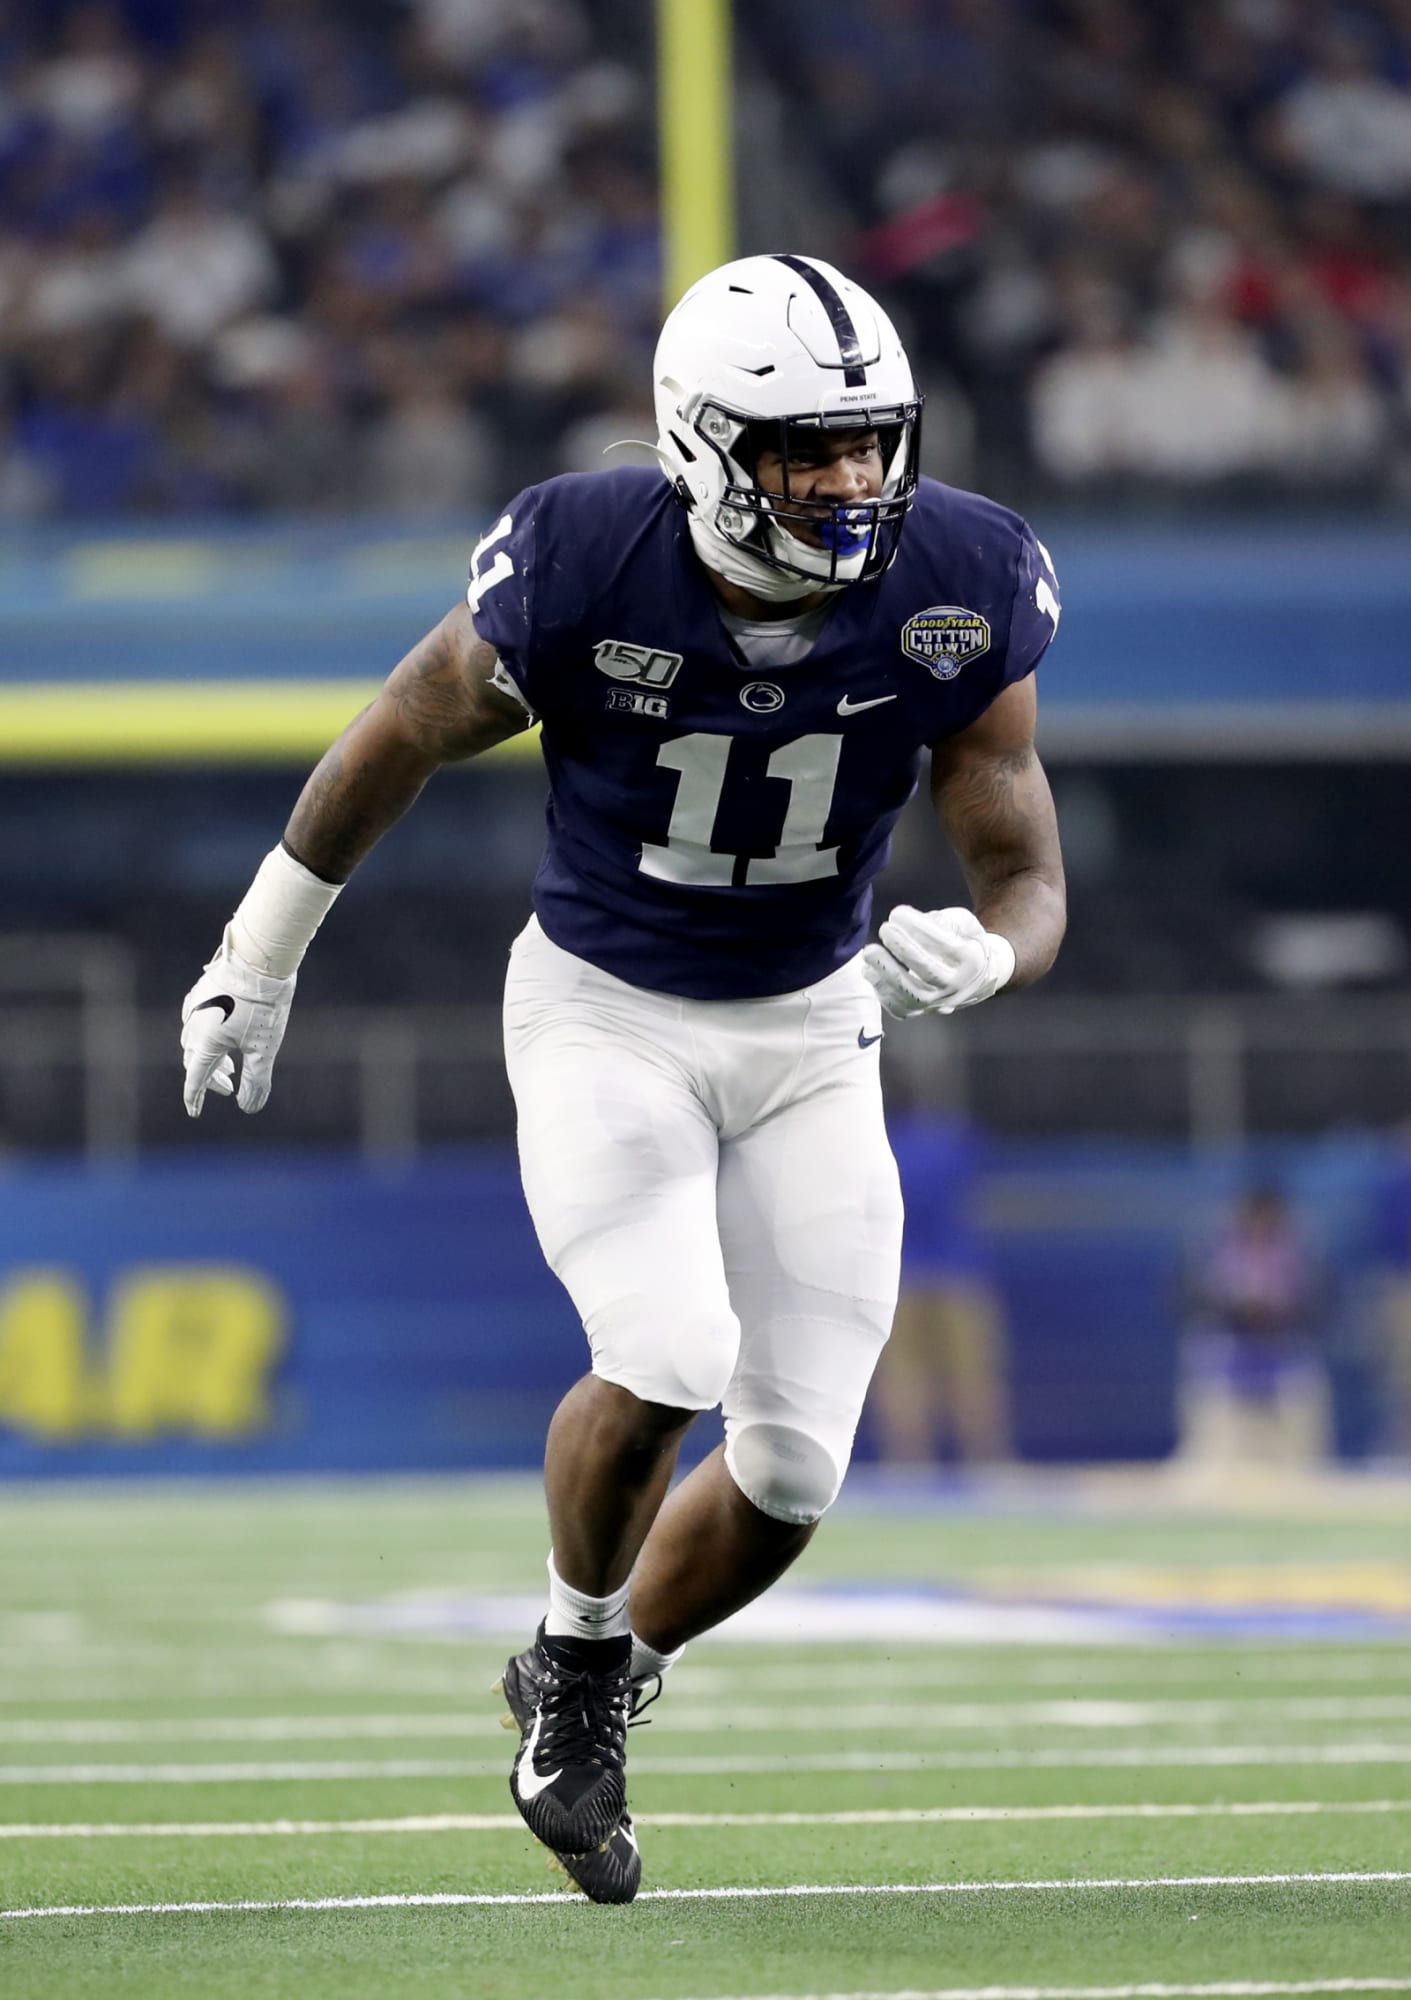 Penn State Football's Micah Parsons to Dallas Cowboys: Come get me